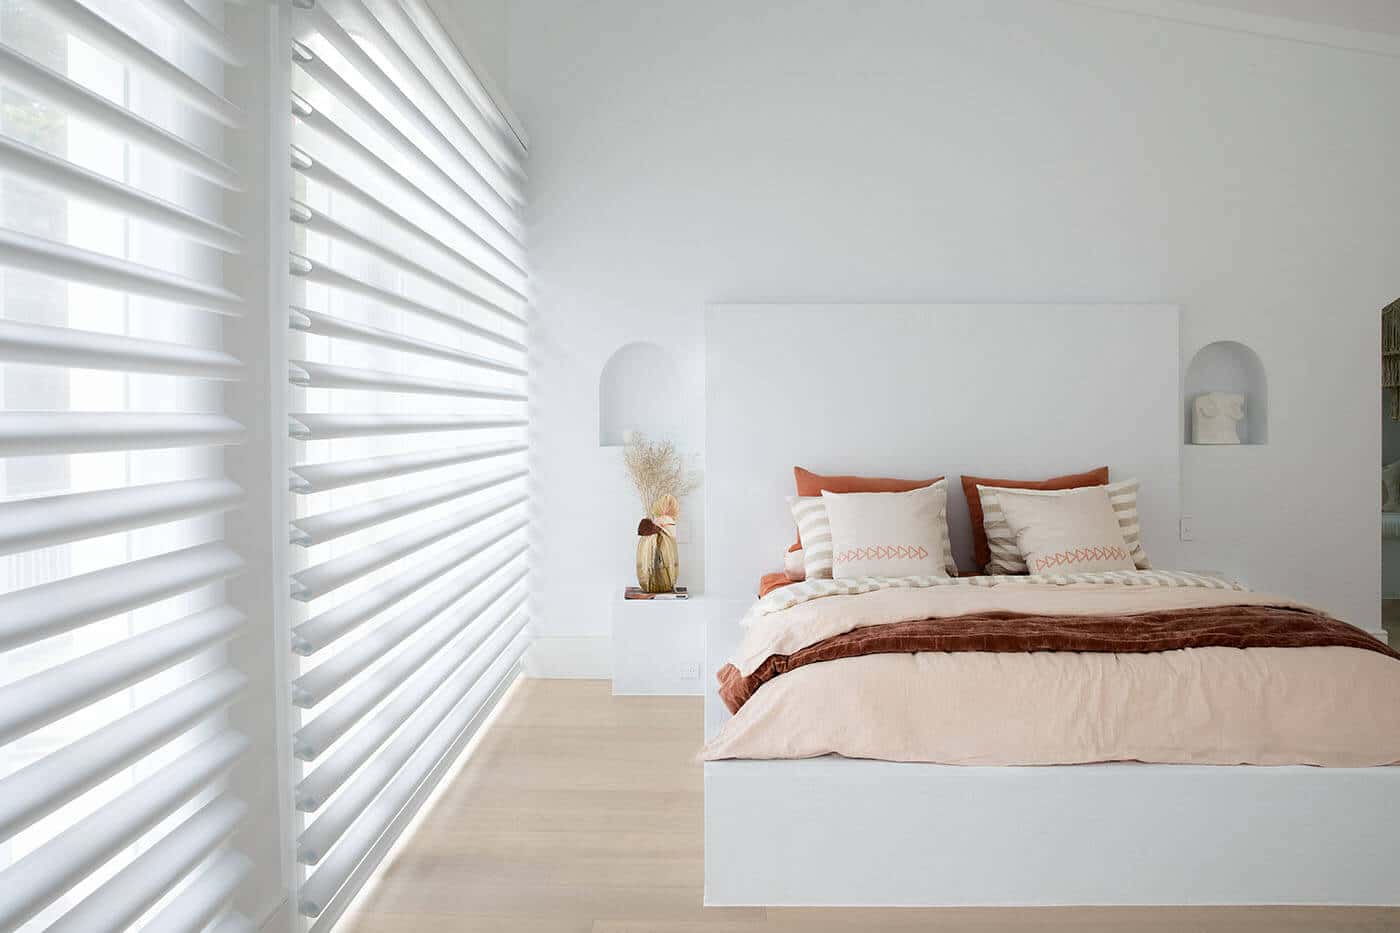 Pirouette Shades with softly curved fabric vanes allowing flexible light control and UV protection diffusing light in a cozy bedroom. Innovative and minimalist design. For sale at Complete Blinds Australia.